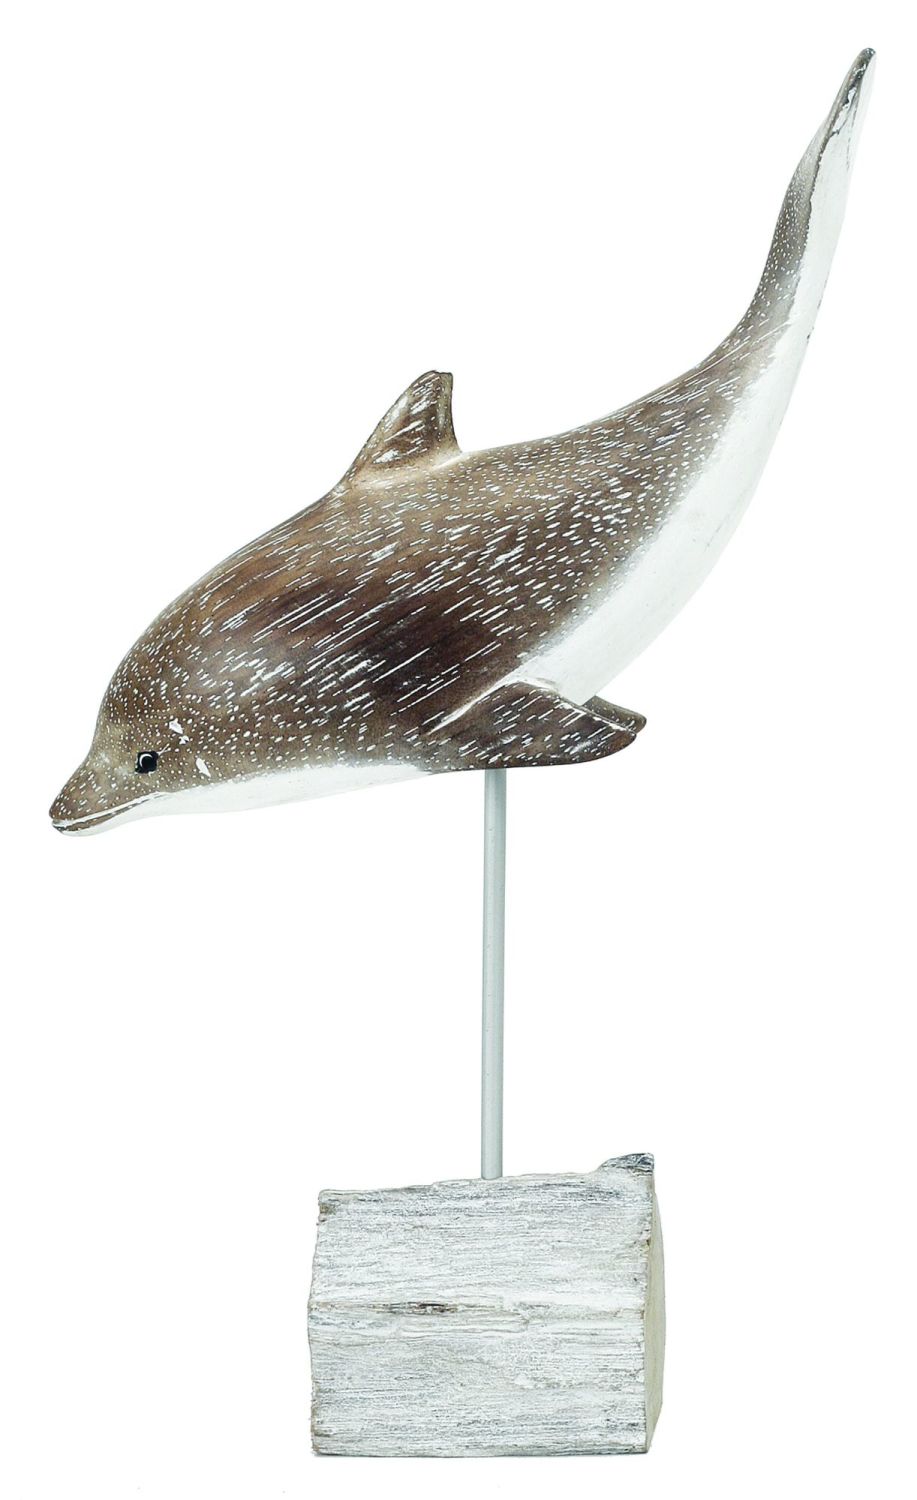 Archipelago Dolphin Diving Wood Carving